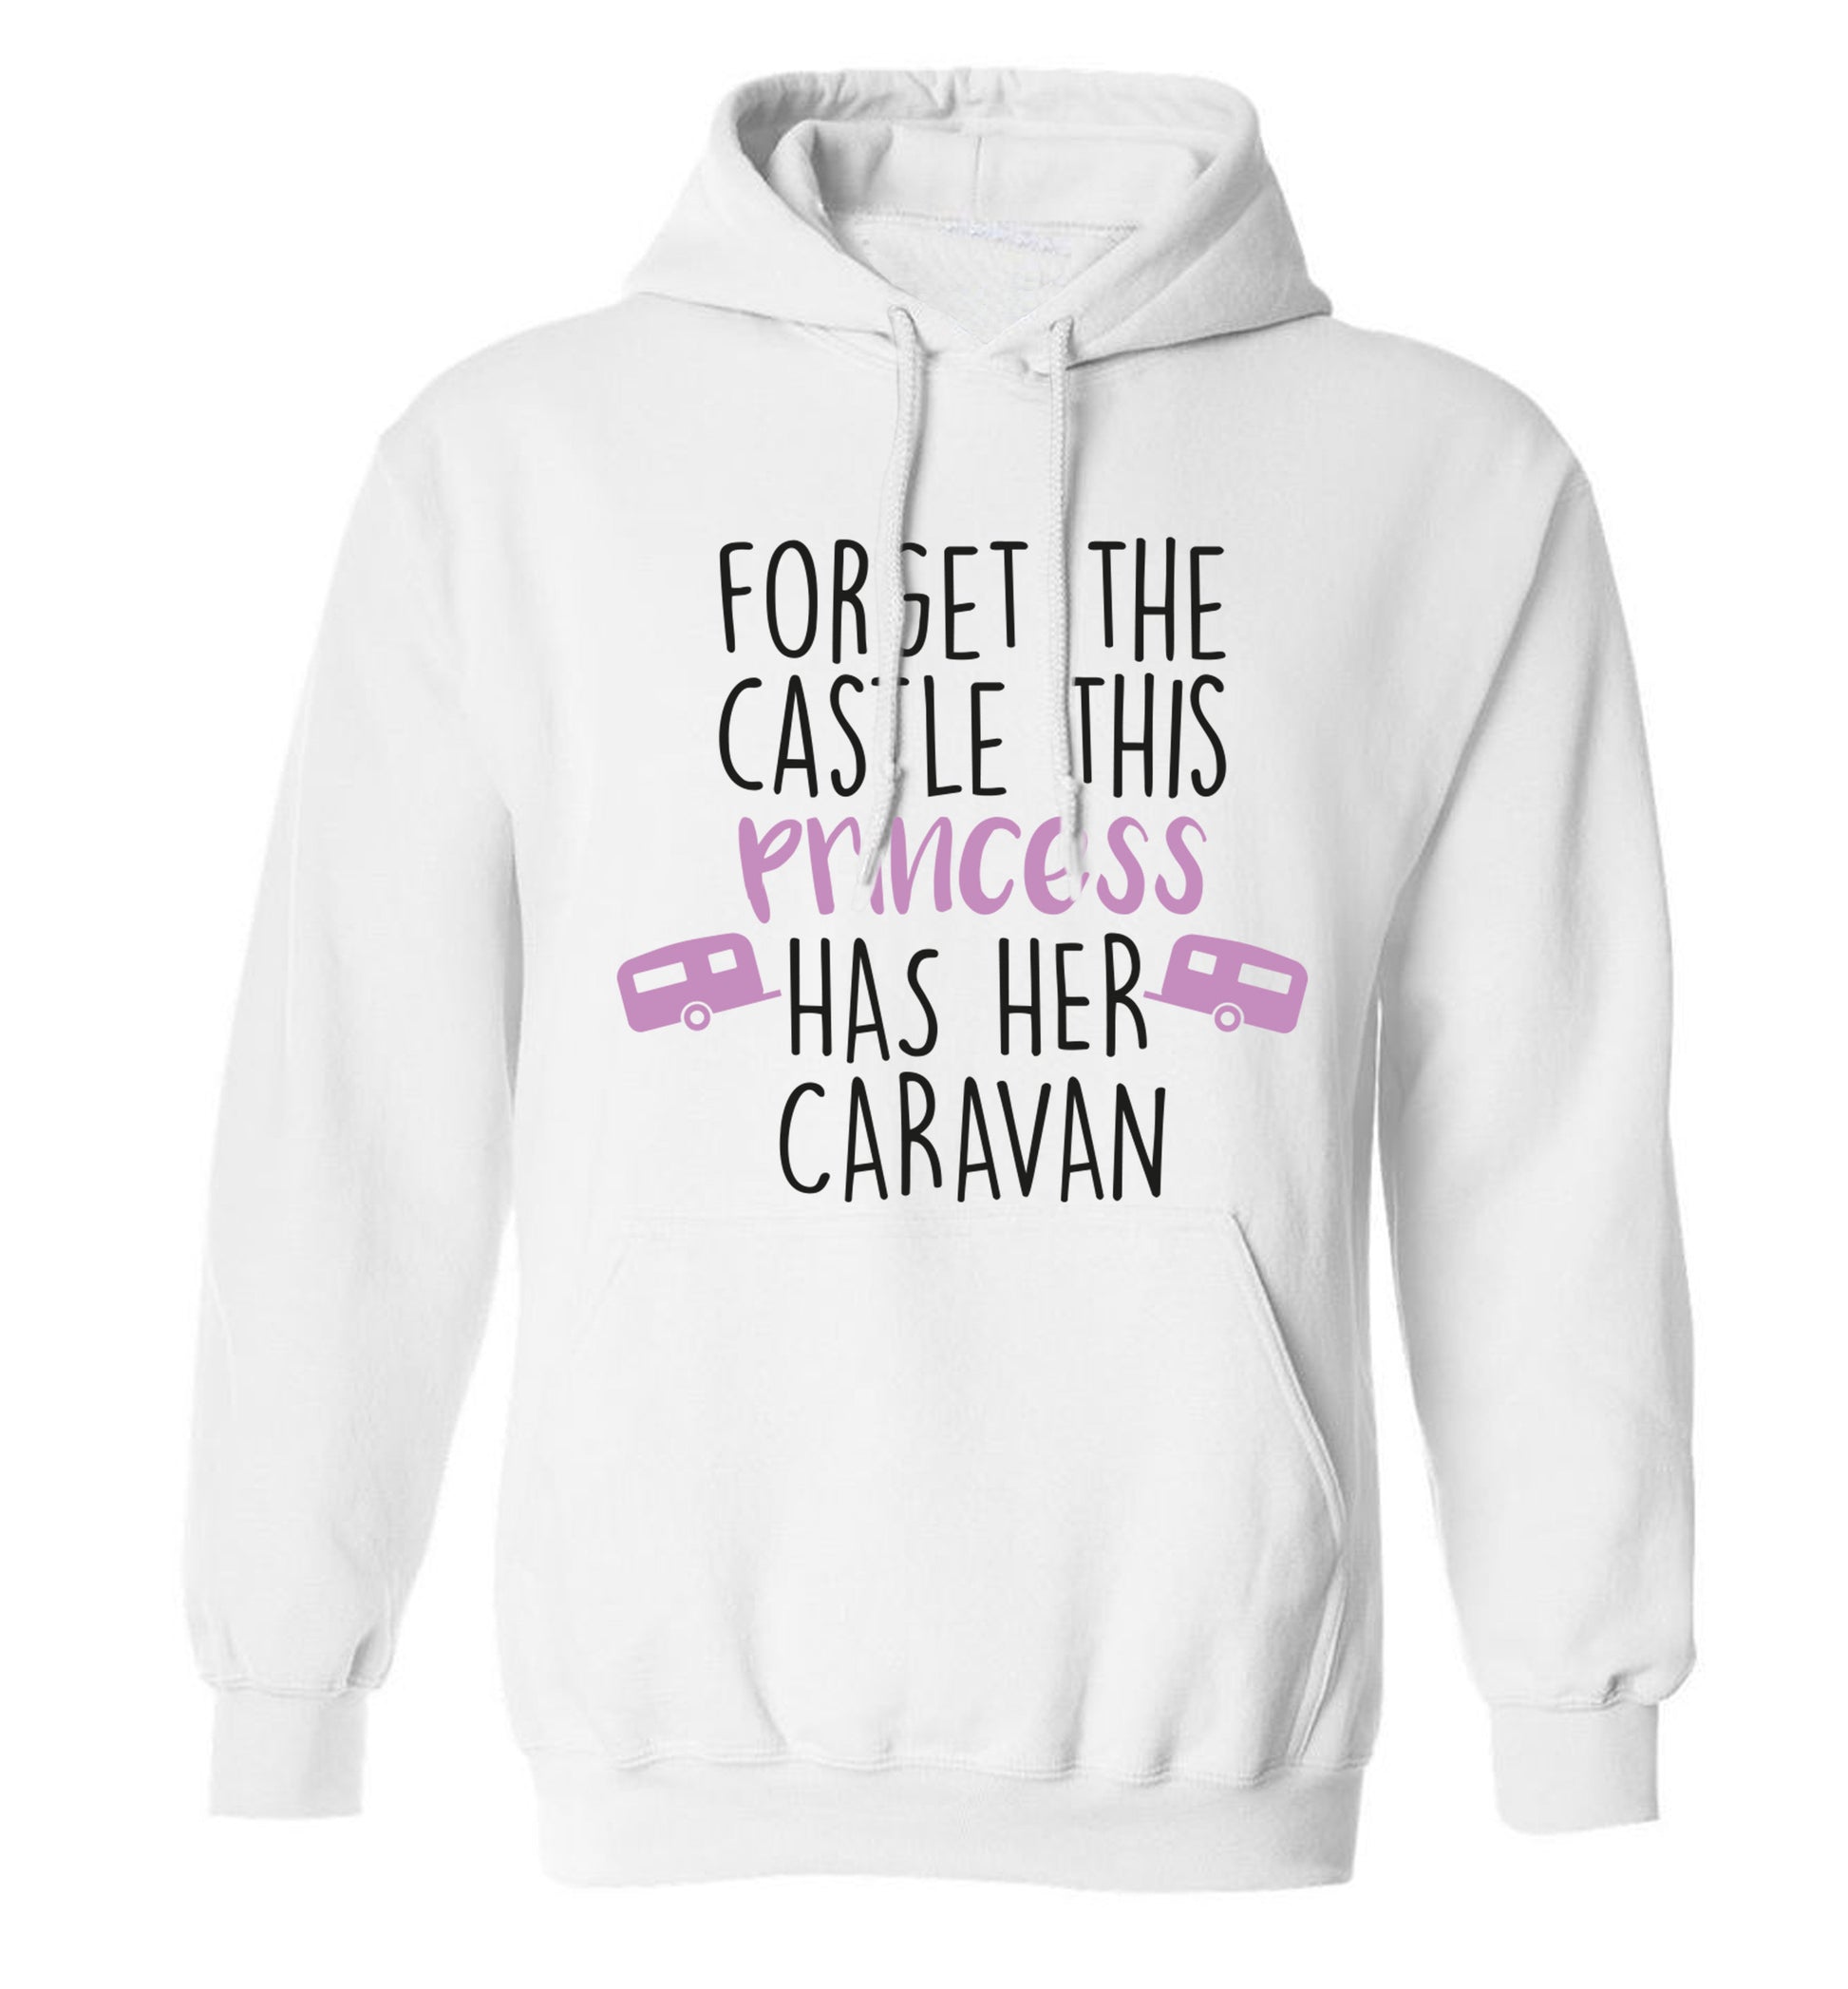 Forget the castle this princess lives at the caravan adults unisex white hoodie 2XL